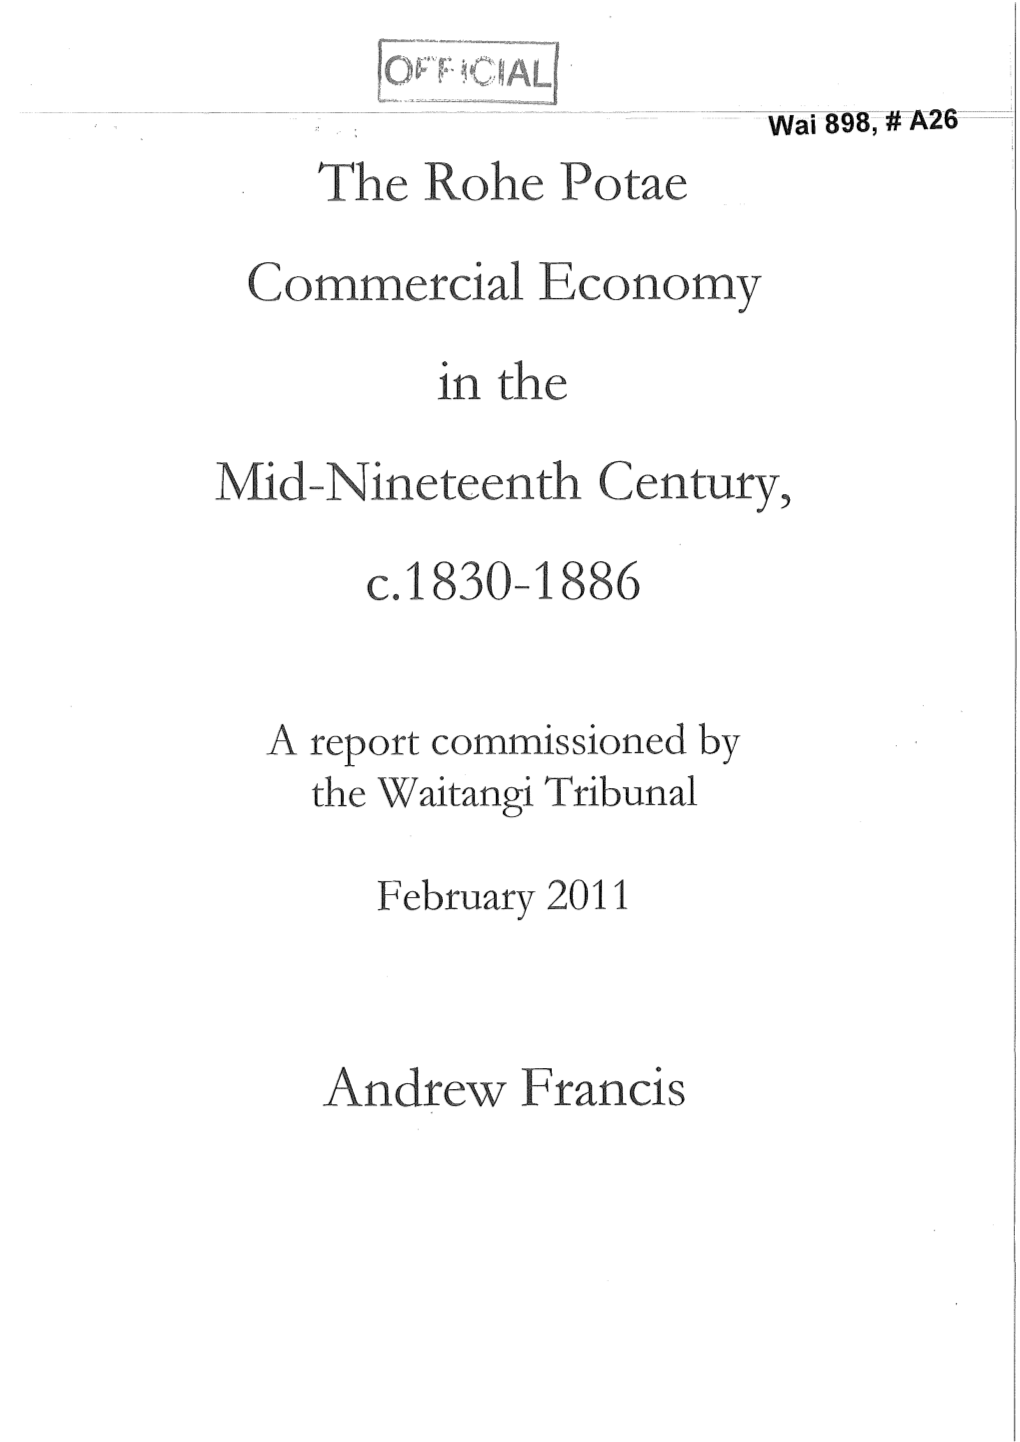 The Rohe Potae Commercial Economy in the Mid- Ineteenth Century, C.1830-1886